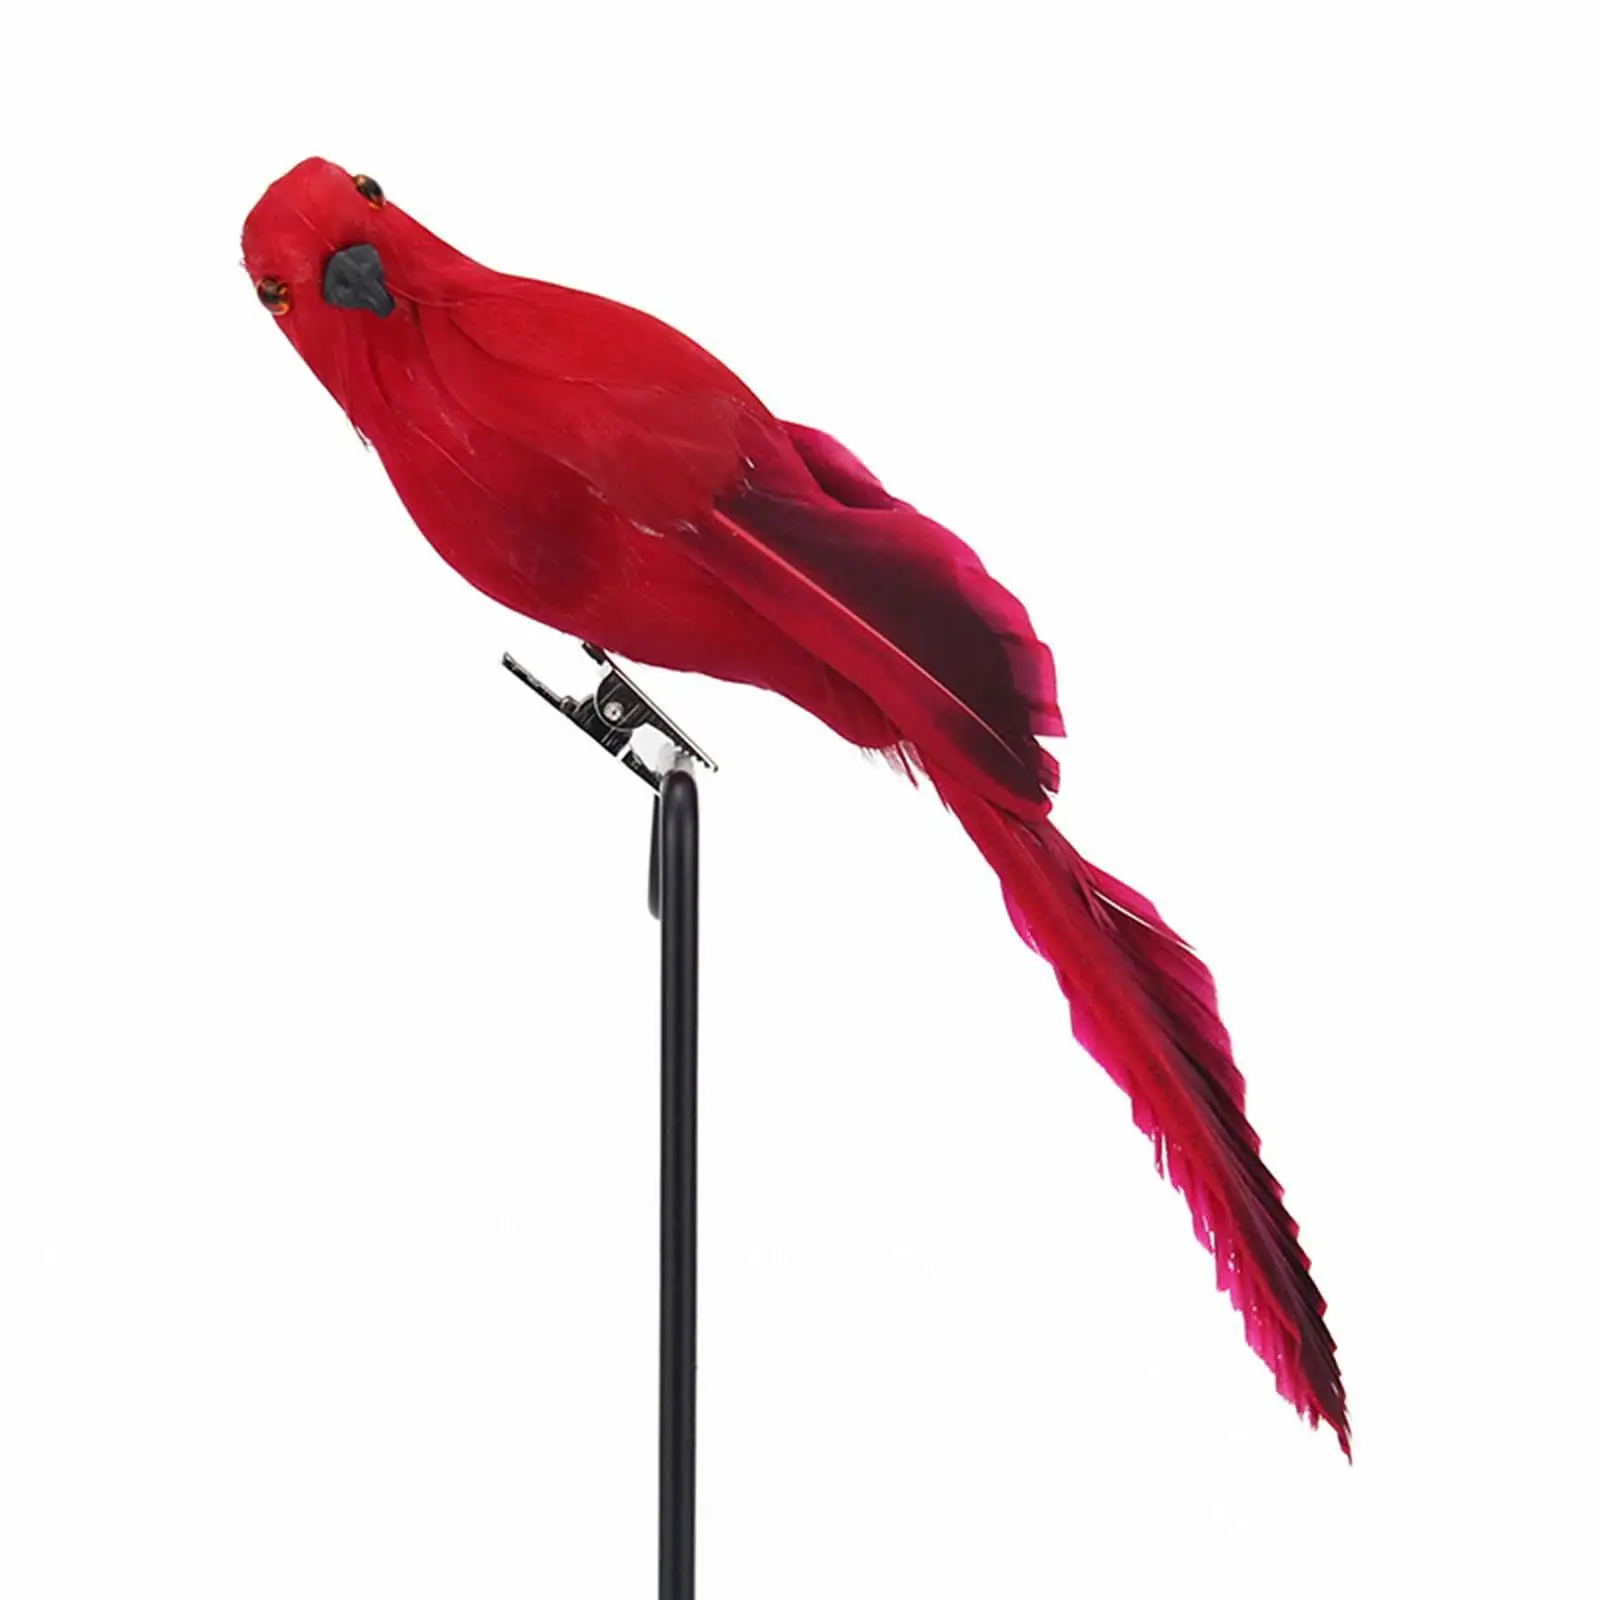  Artificial Birds Photography Props Model Sculpture Statue Feathered Parrot for Outdoor Crafts Porch Pathway Landscape Decor